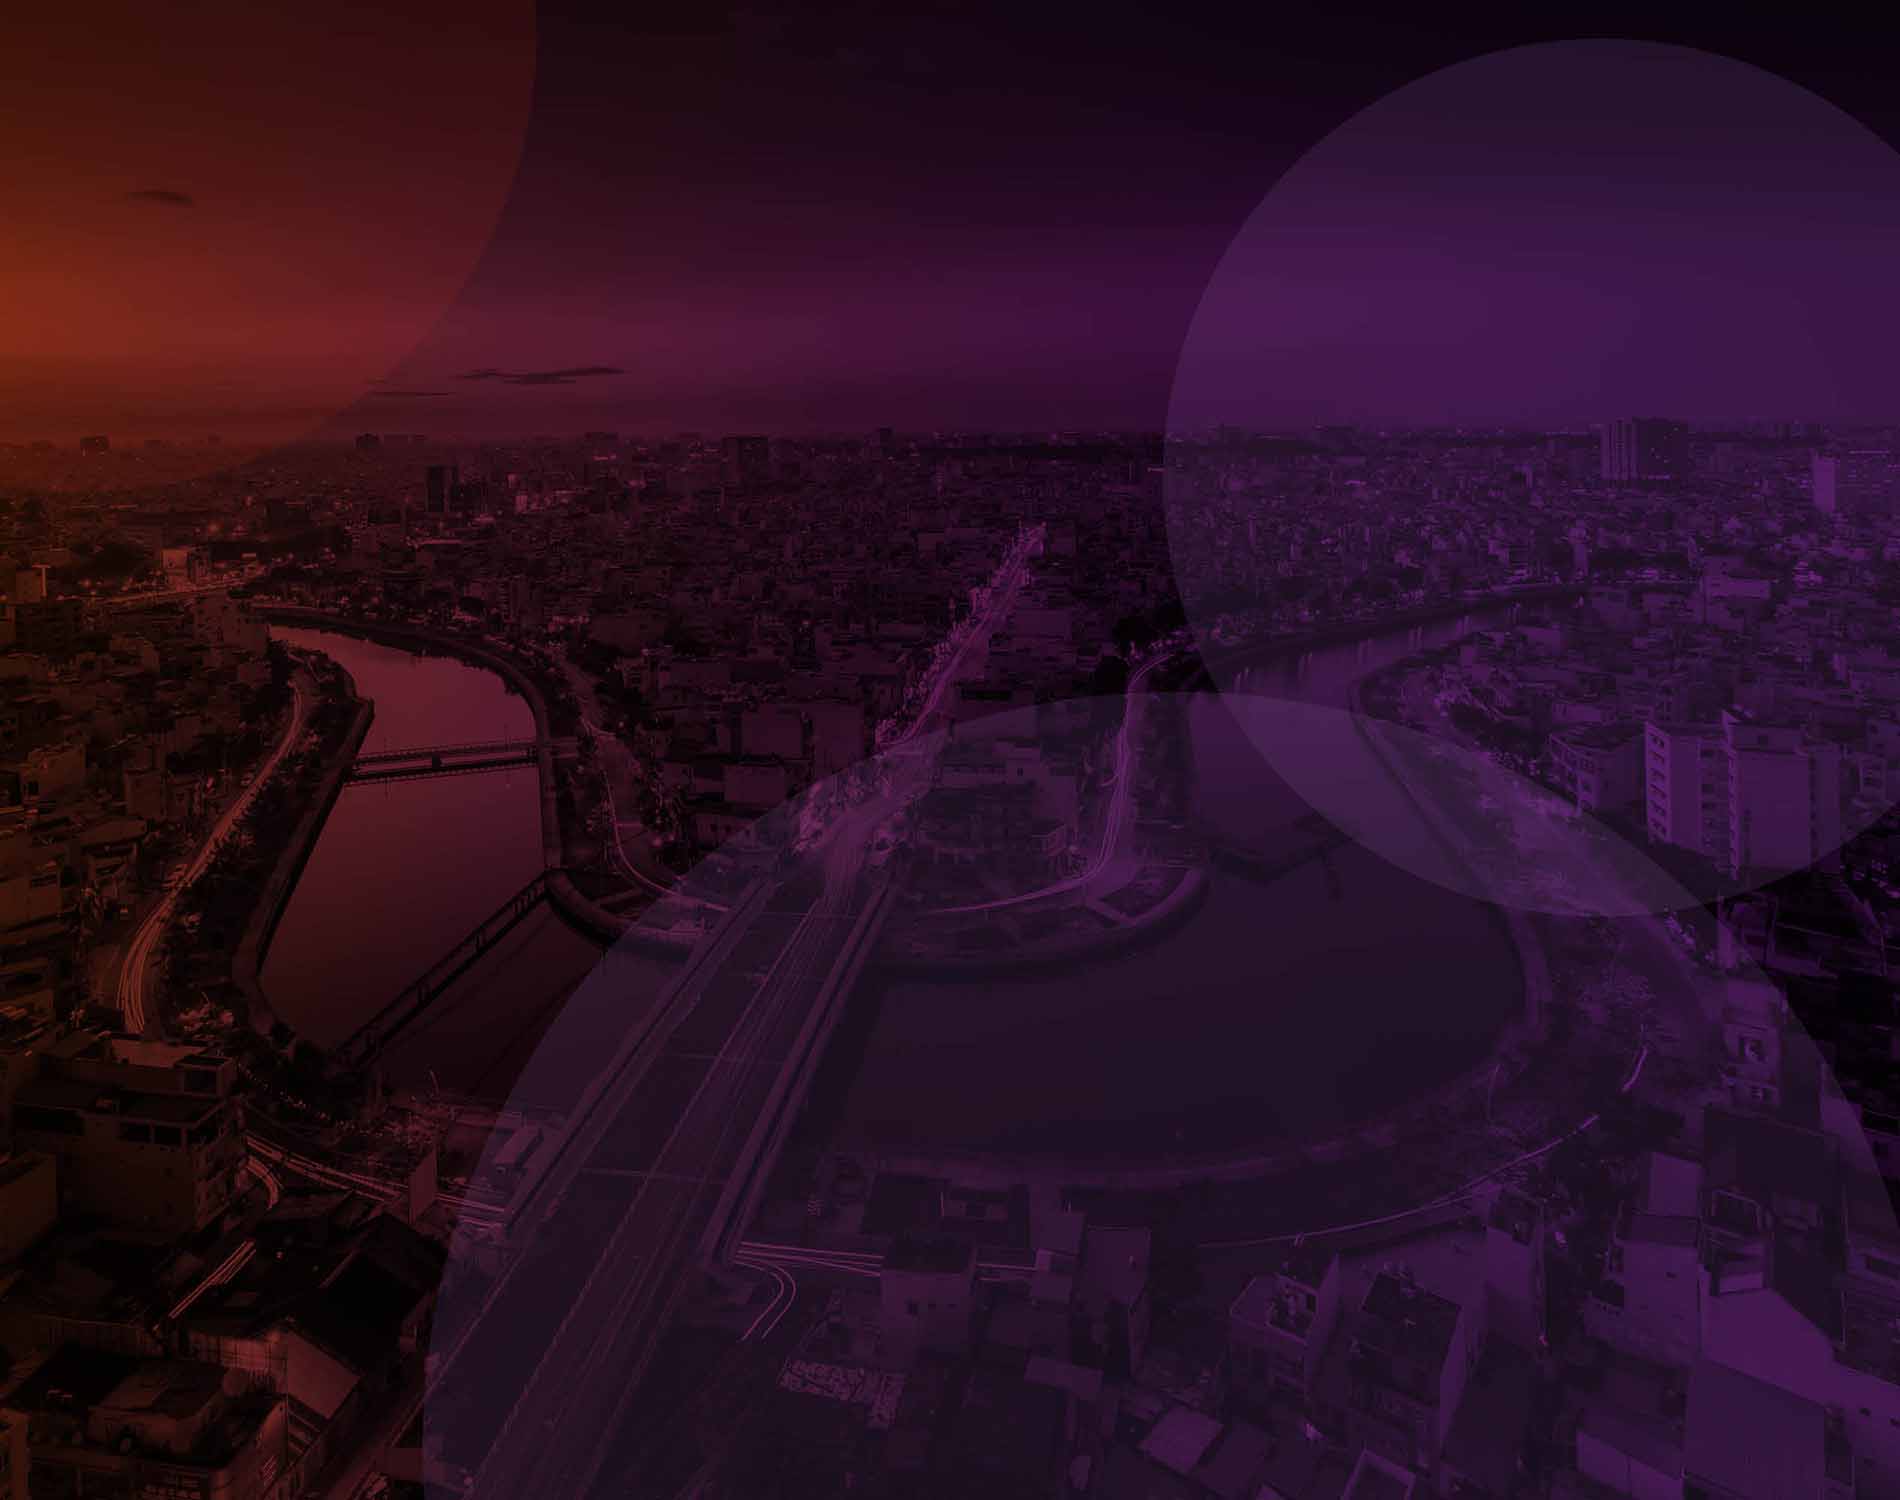 View of Ho Chi Minh City with a purple overlay